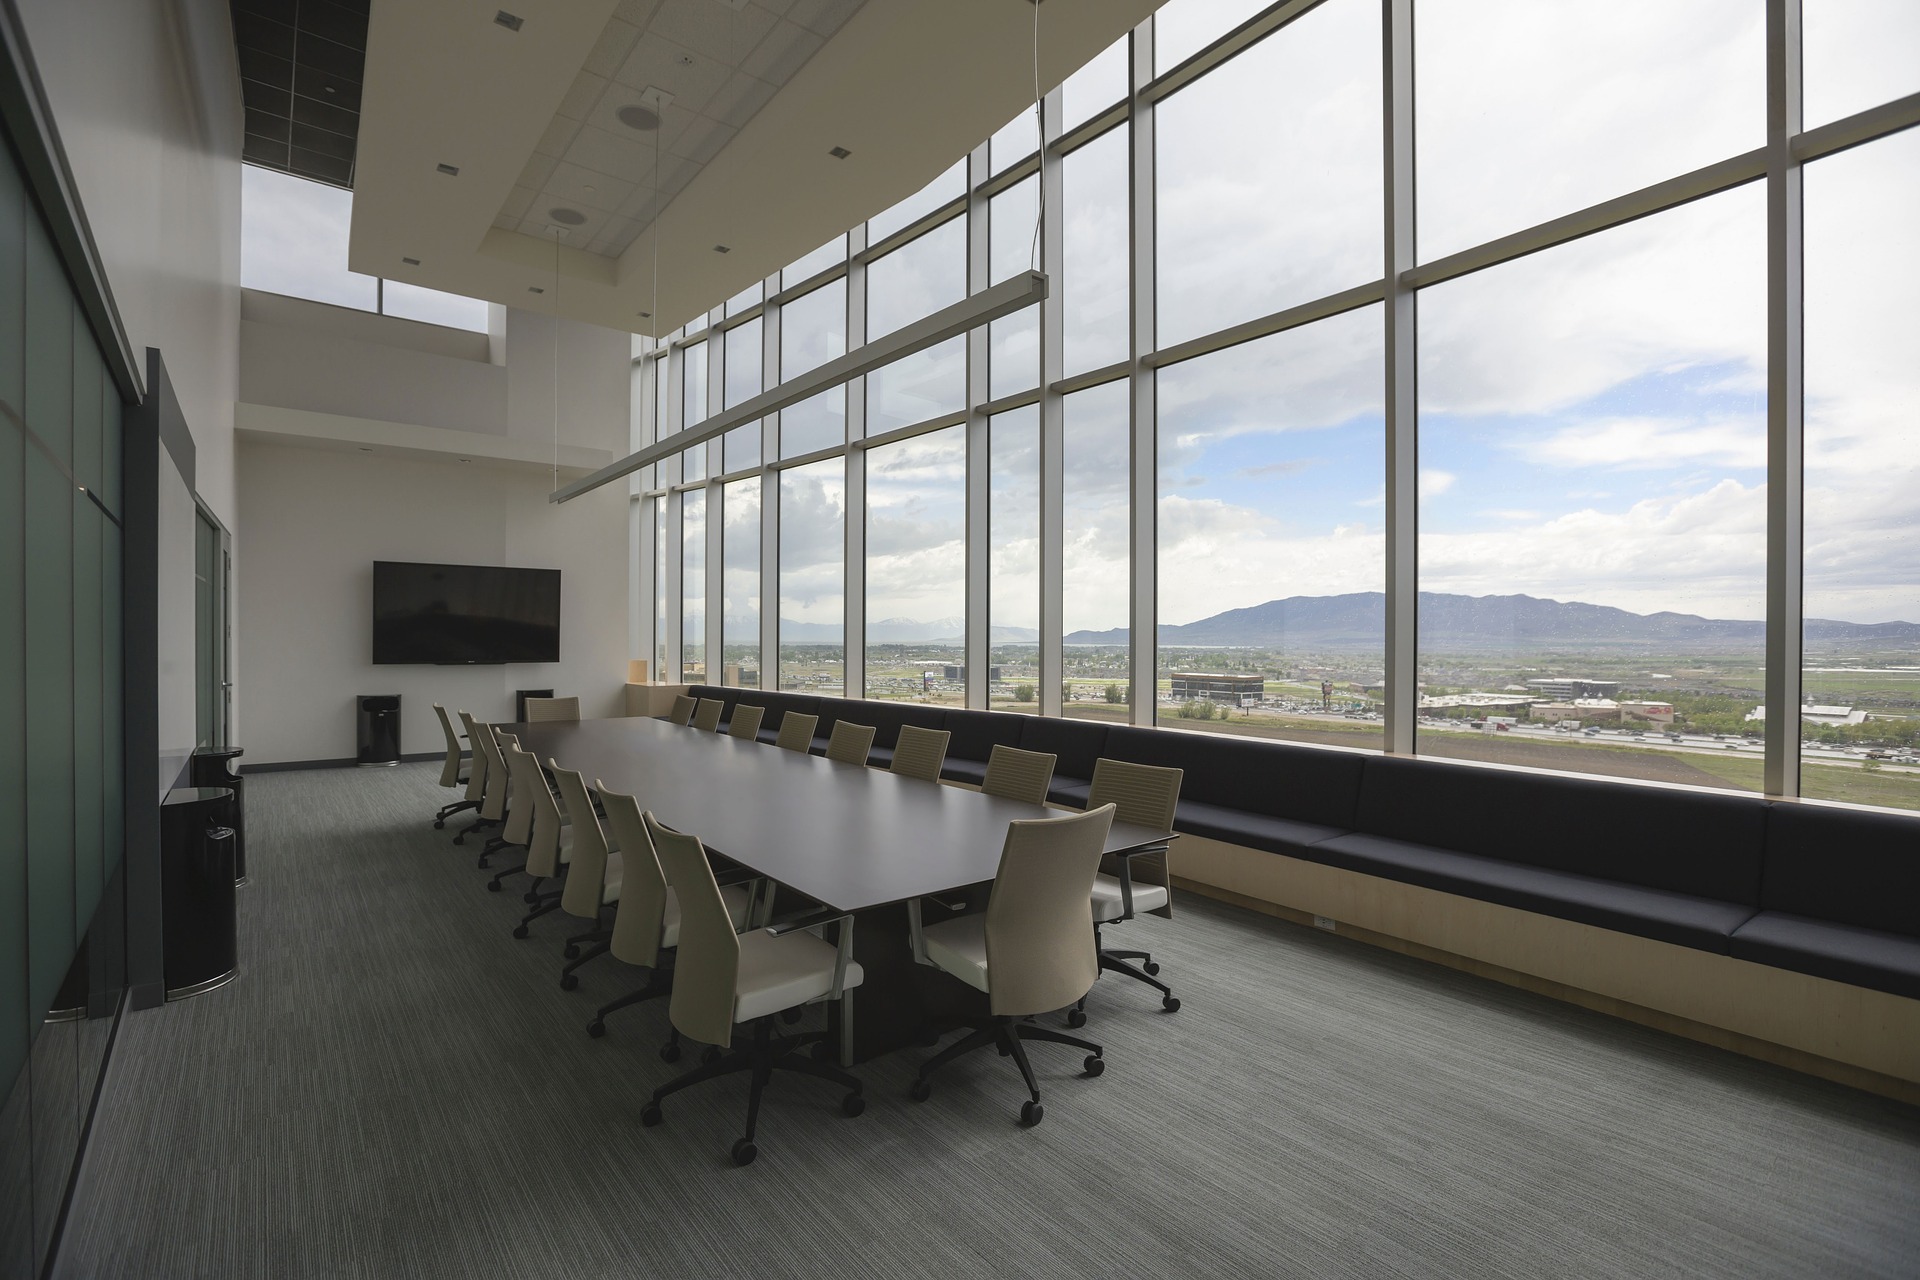 Conference room with vaulted ceilings